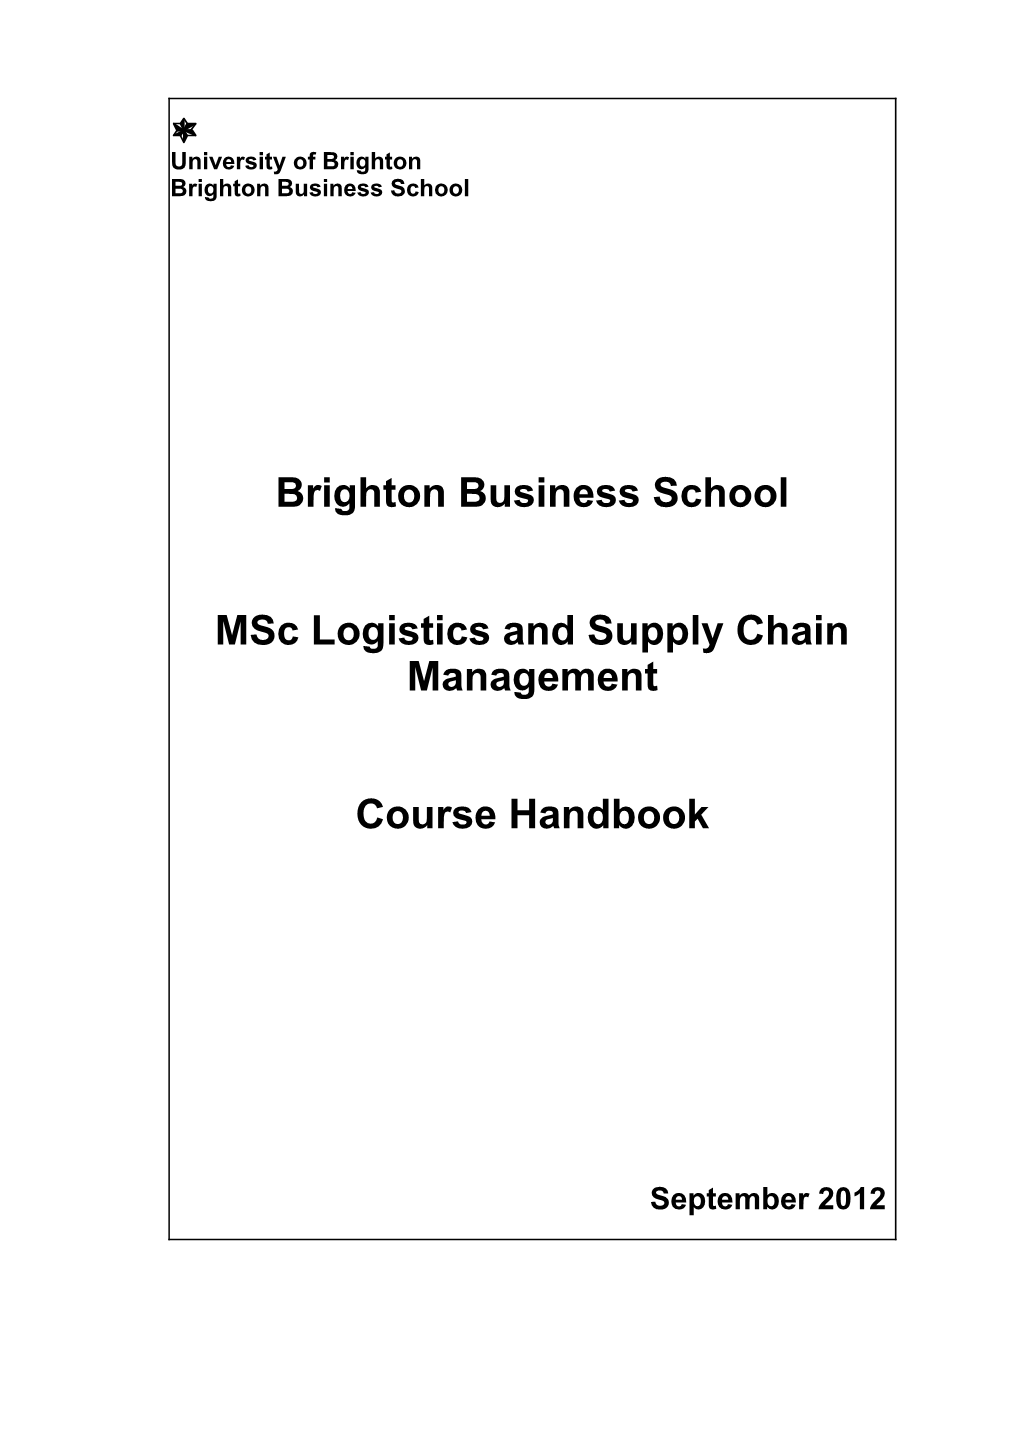 Msc Logistics and Supply Chain Management